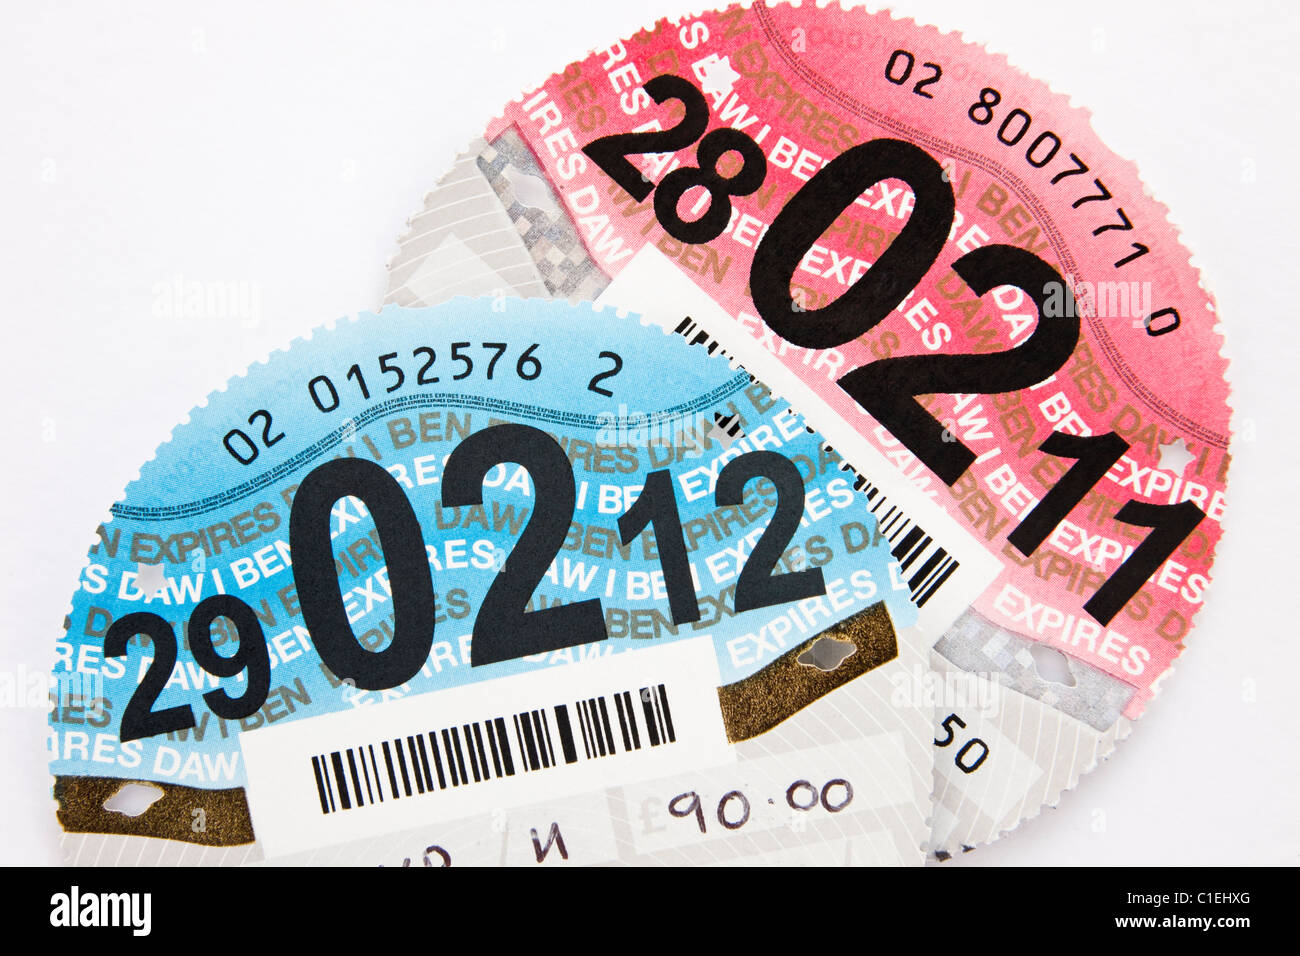 New car tax disc expiring on 29th February 2012 leap year with old expired disc. England, UK, Britain Stock Photo